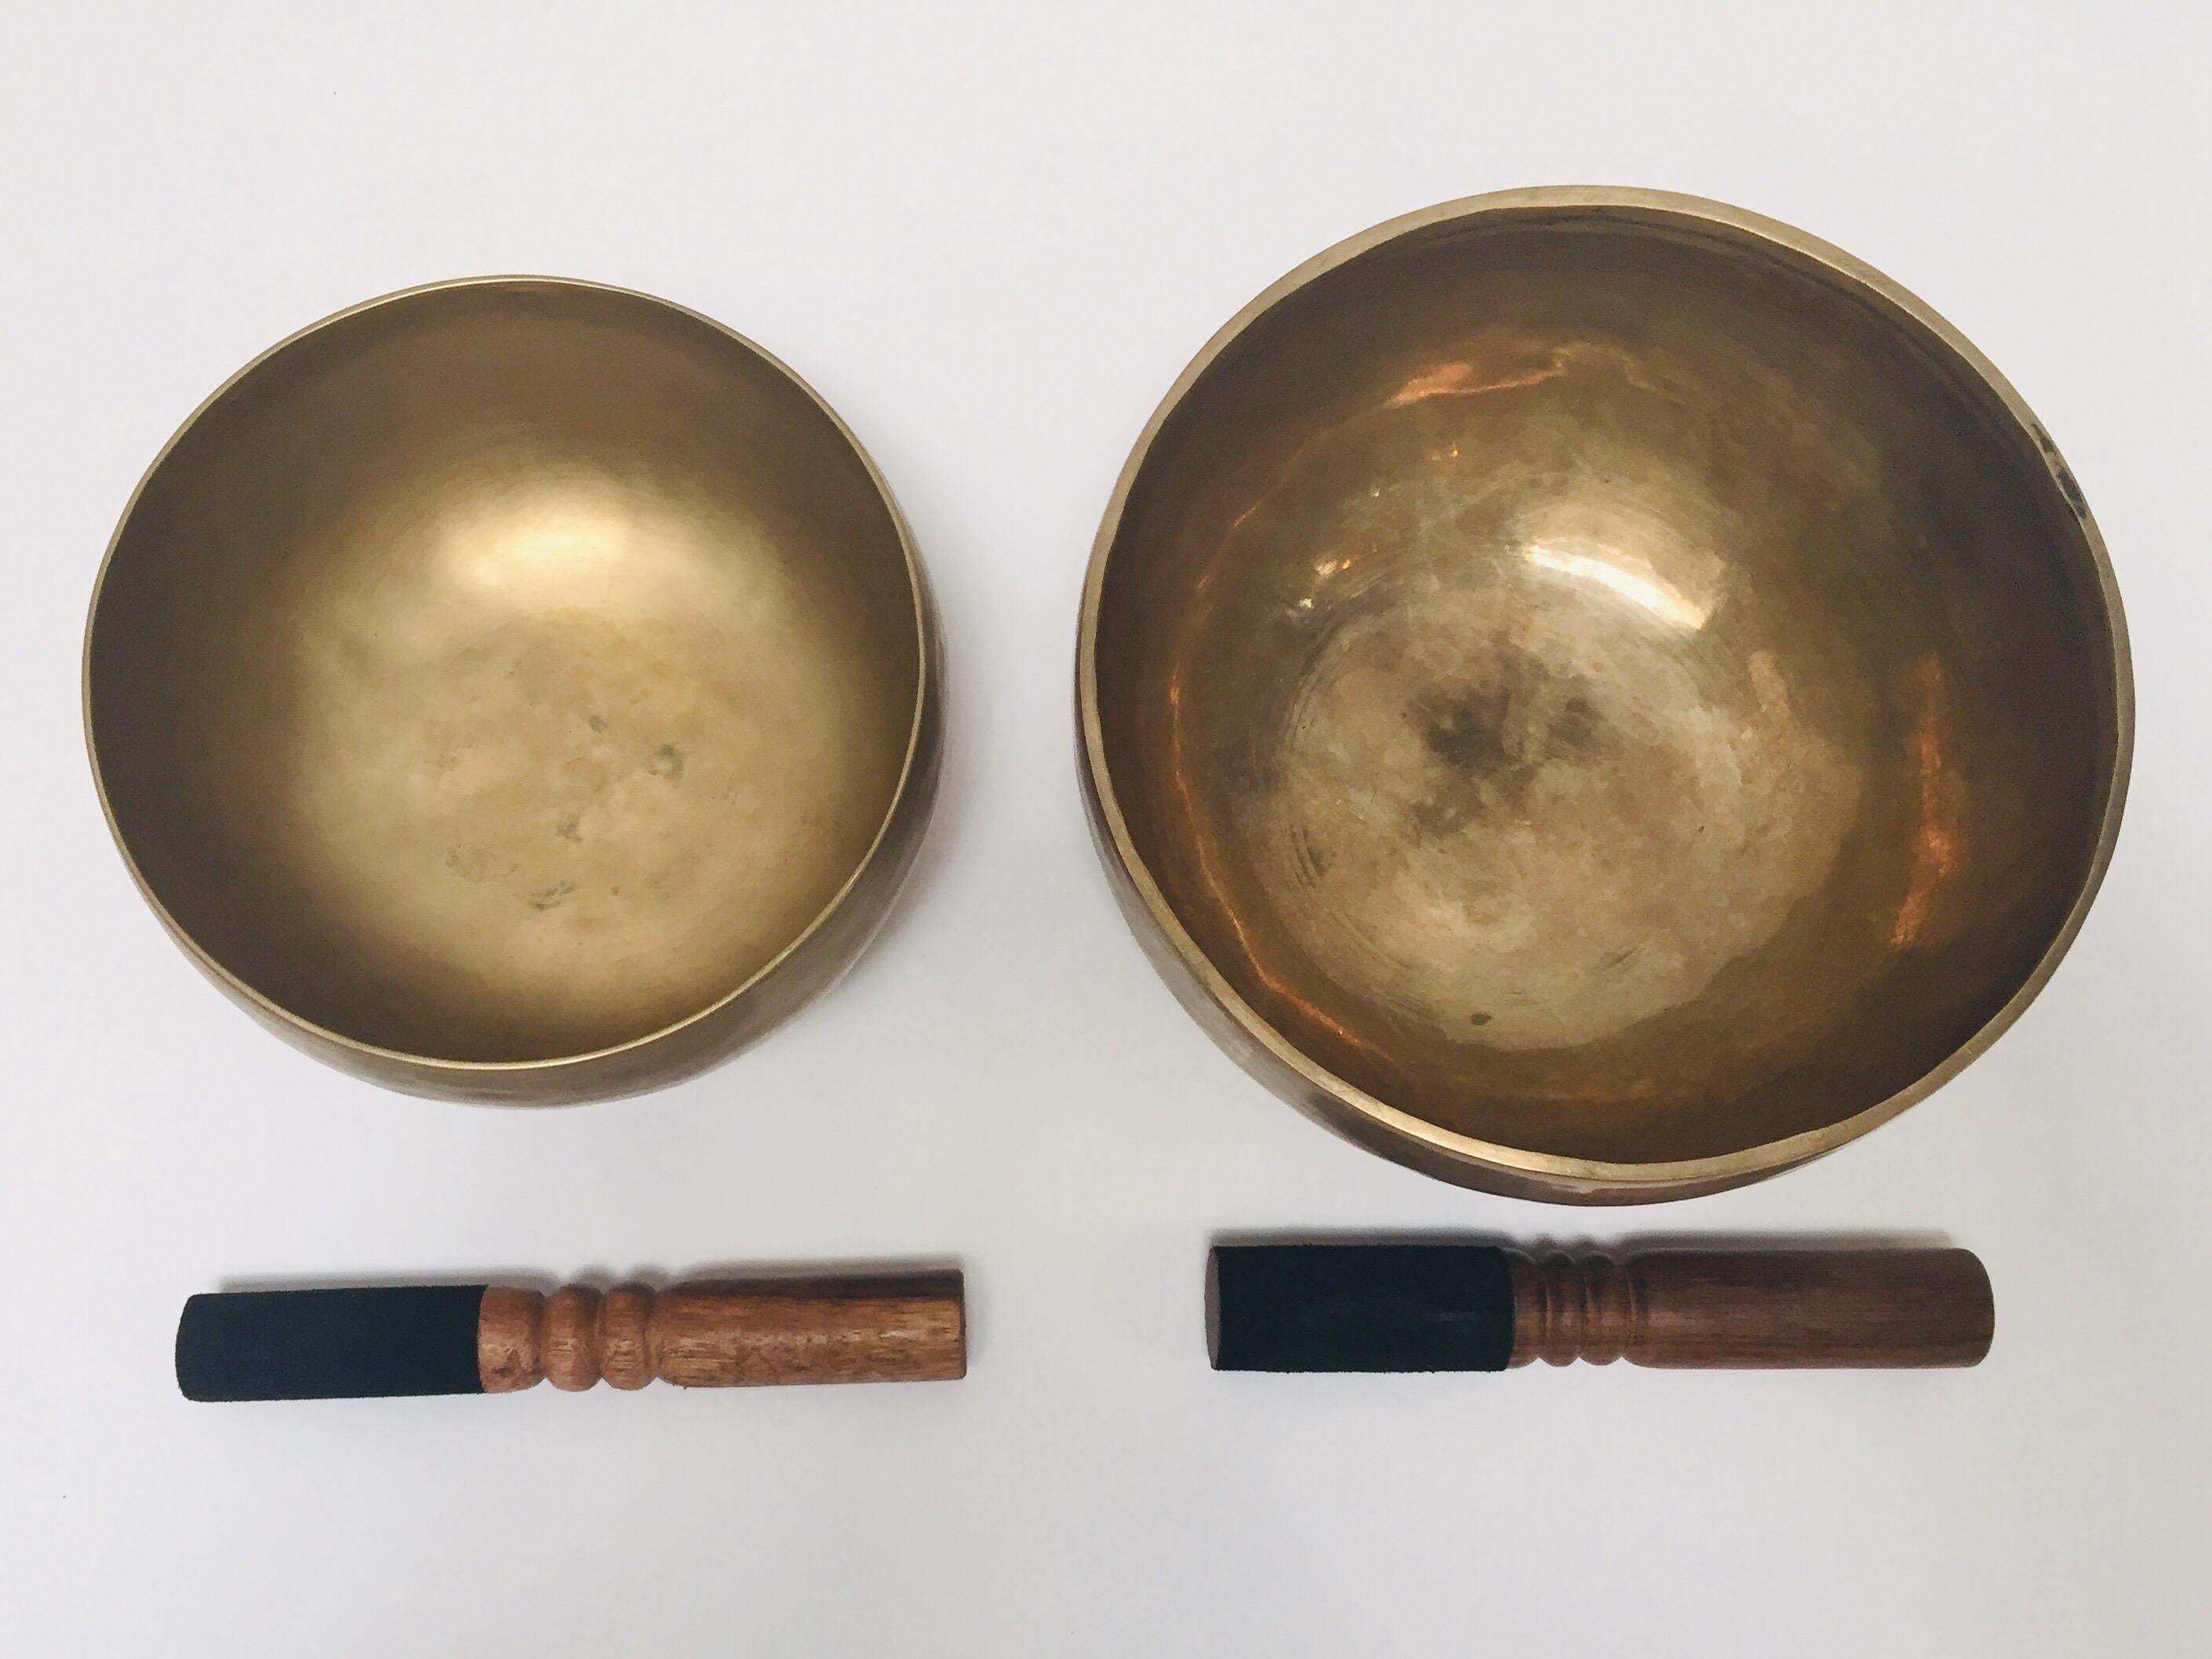 Set of two large hand-hammered Tibetan brass bowls are used in some Buddhist religious practices to accompany periods of meditation and chanting.
They have become popular with music therapists, sound healers and yoga practitioners.
The singing